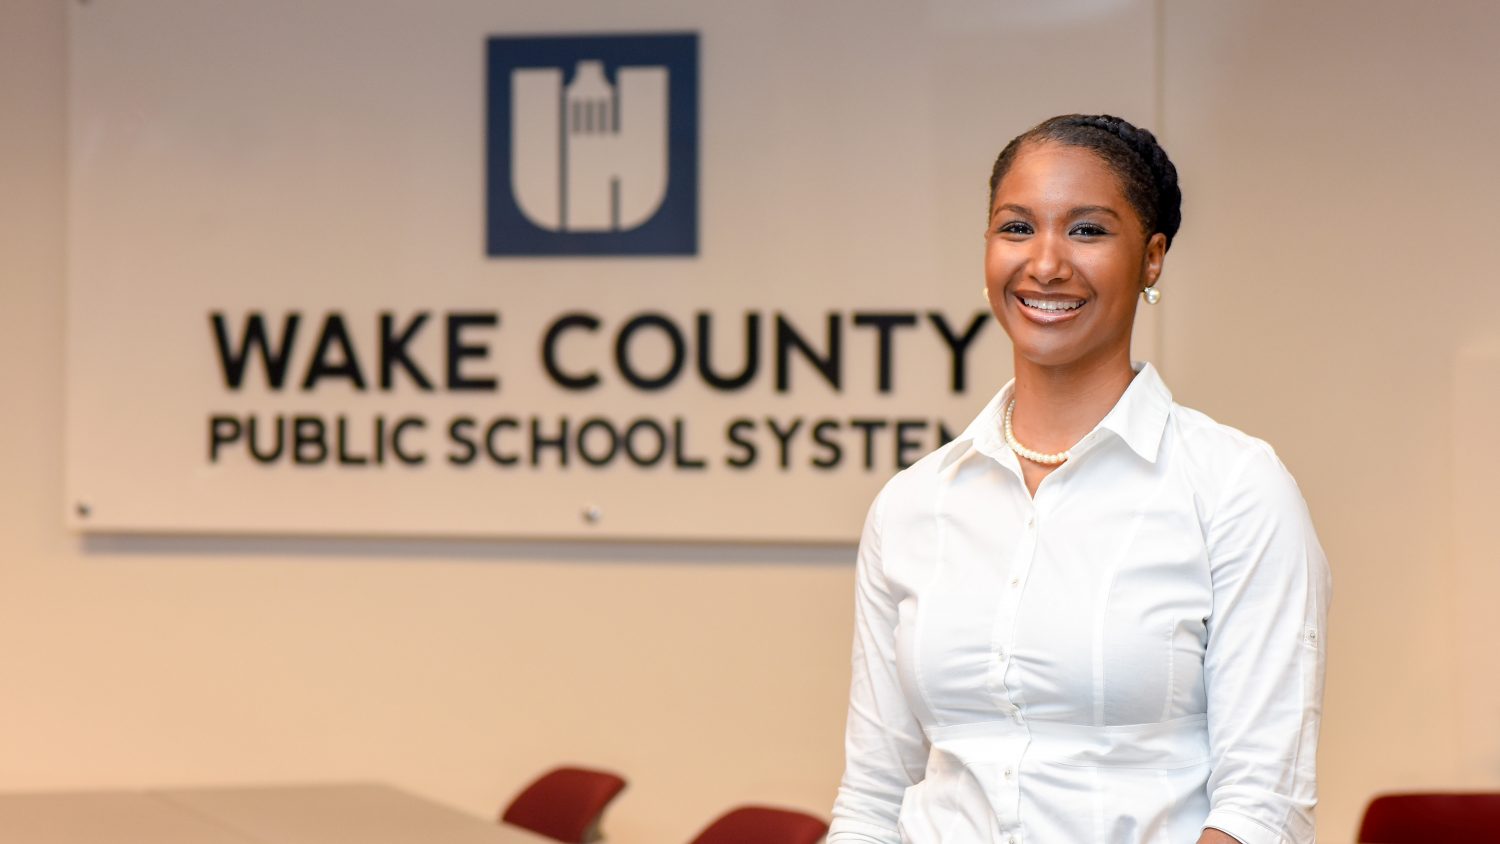 LaTeisha Jeannis in front of Wake County Public School System sign